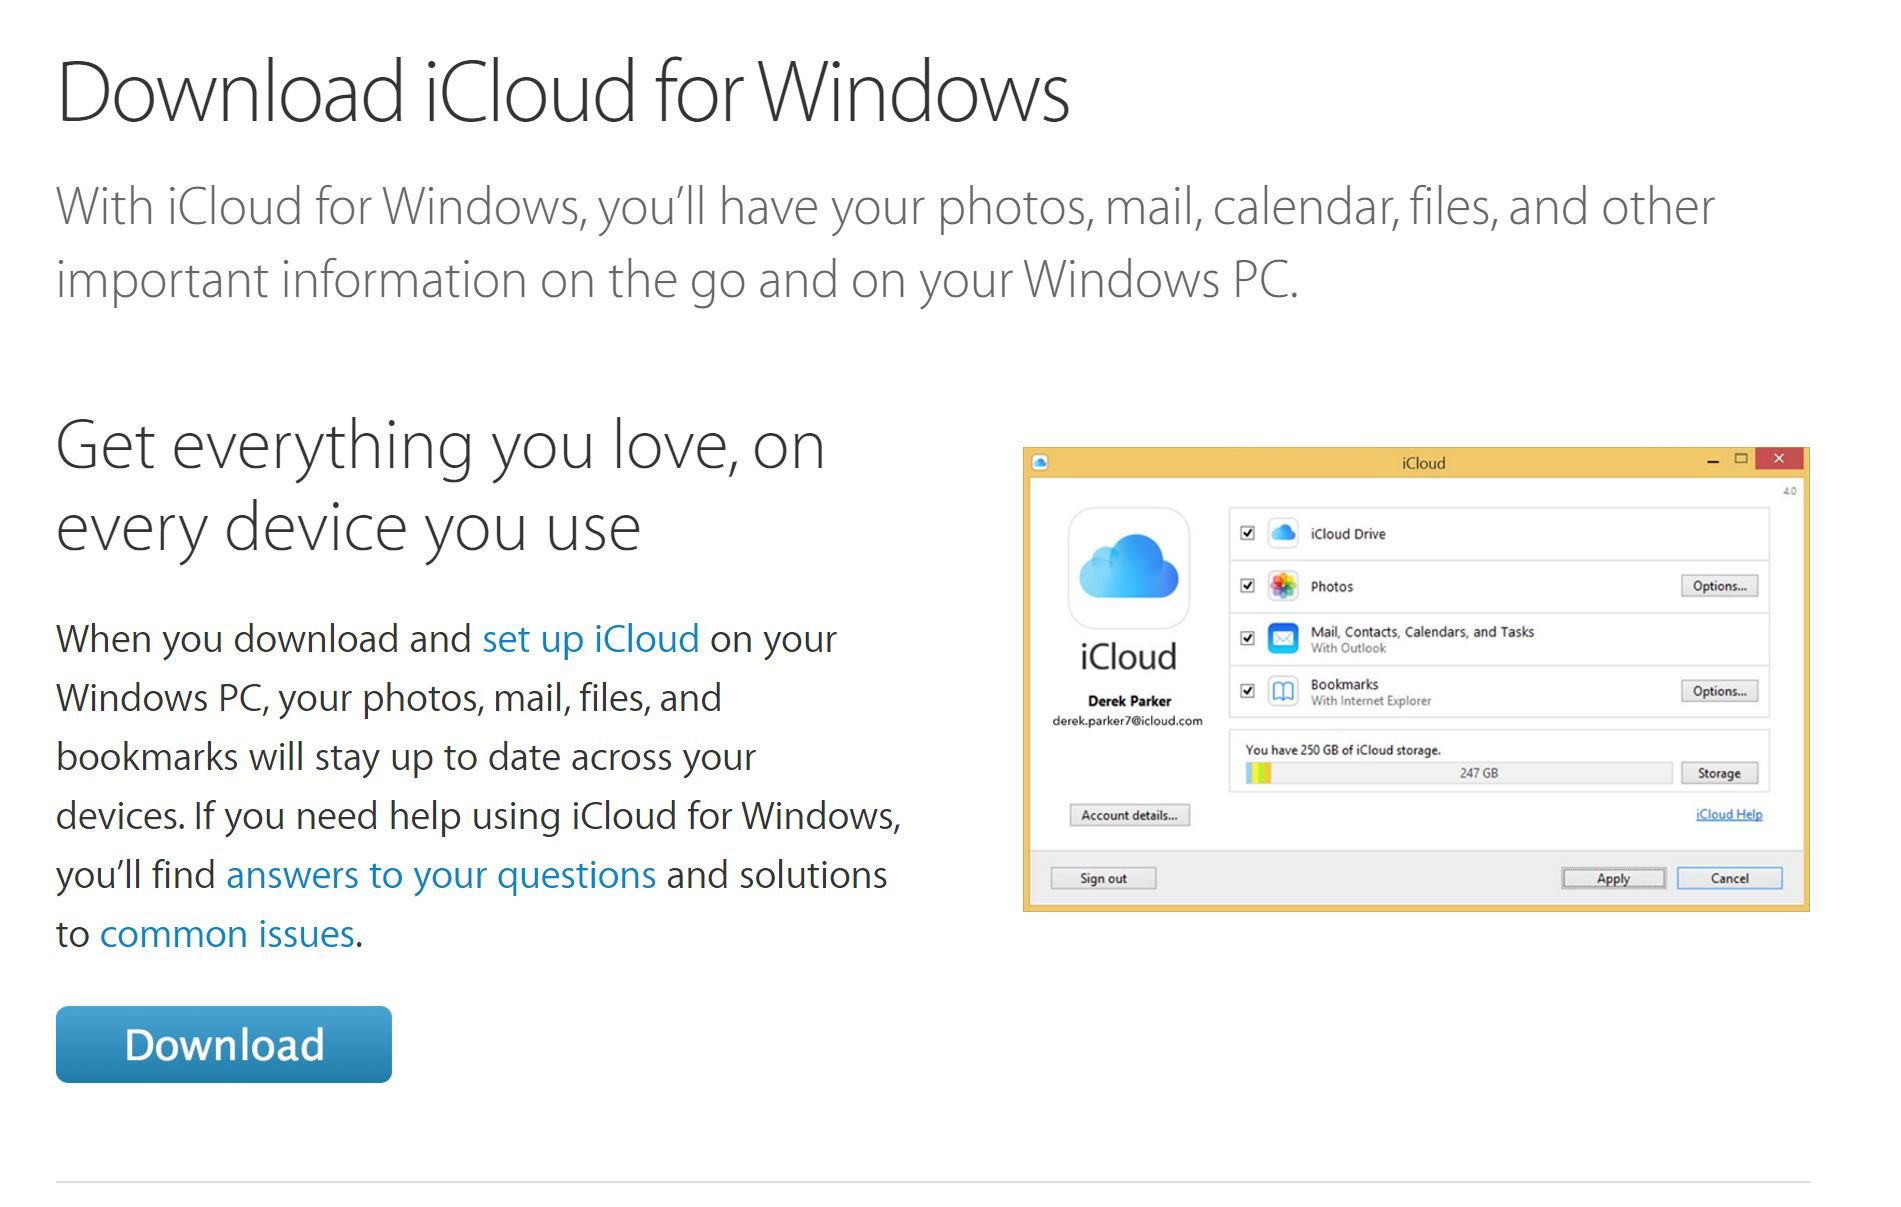 cannot download icloud for windows